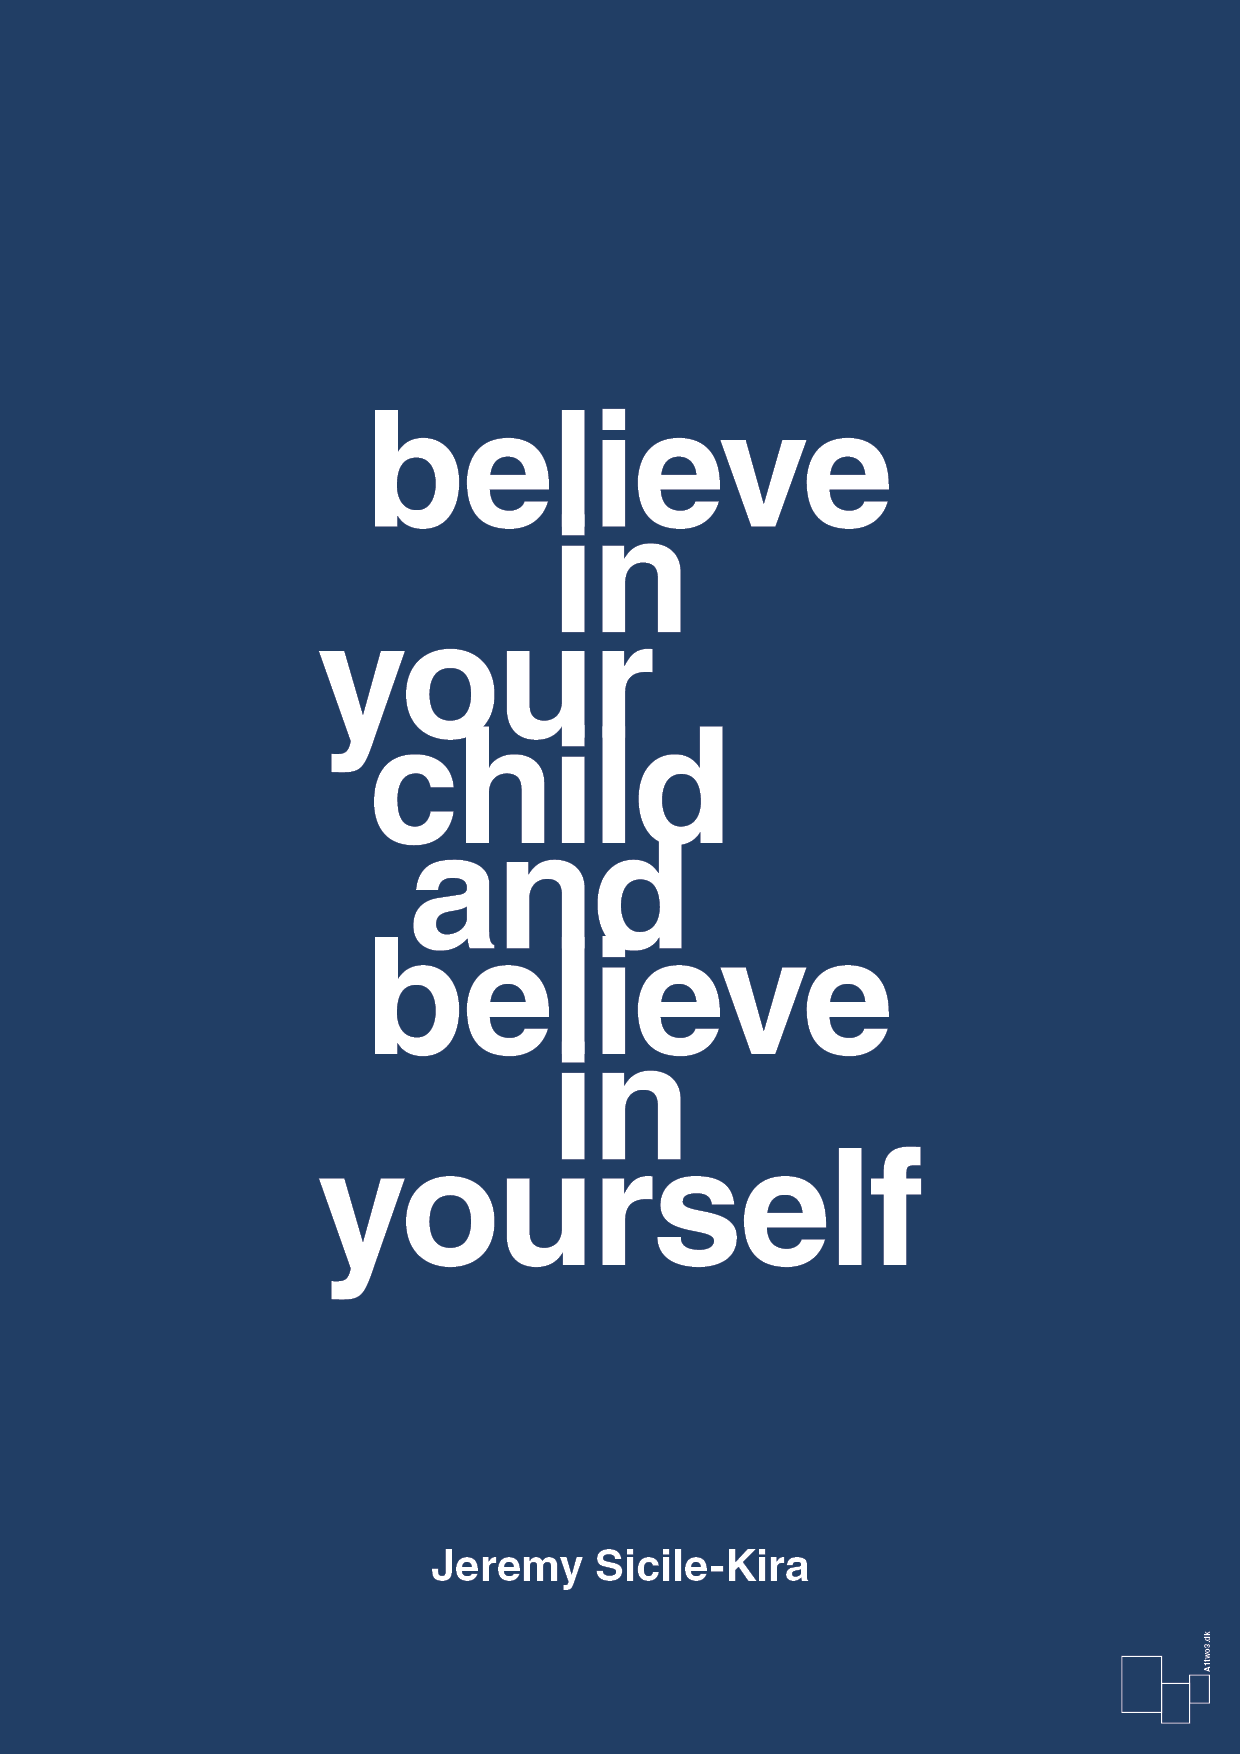 believe in your child and believe in yourself - Plakat med Samfund i Lapis Blue